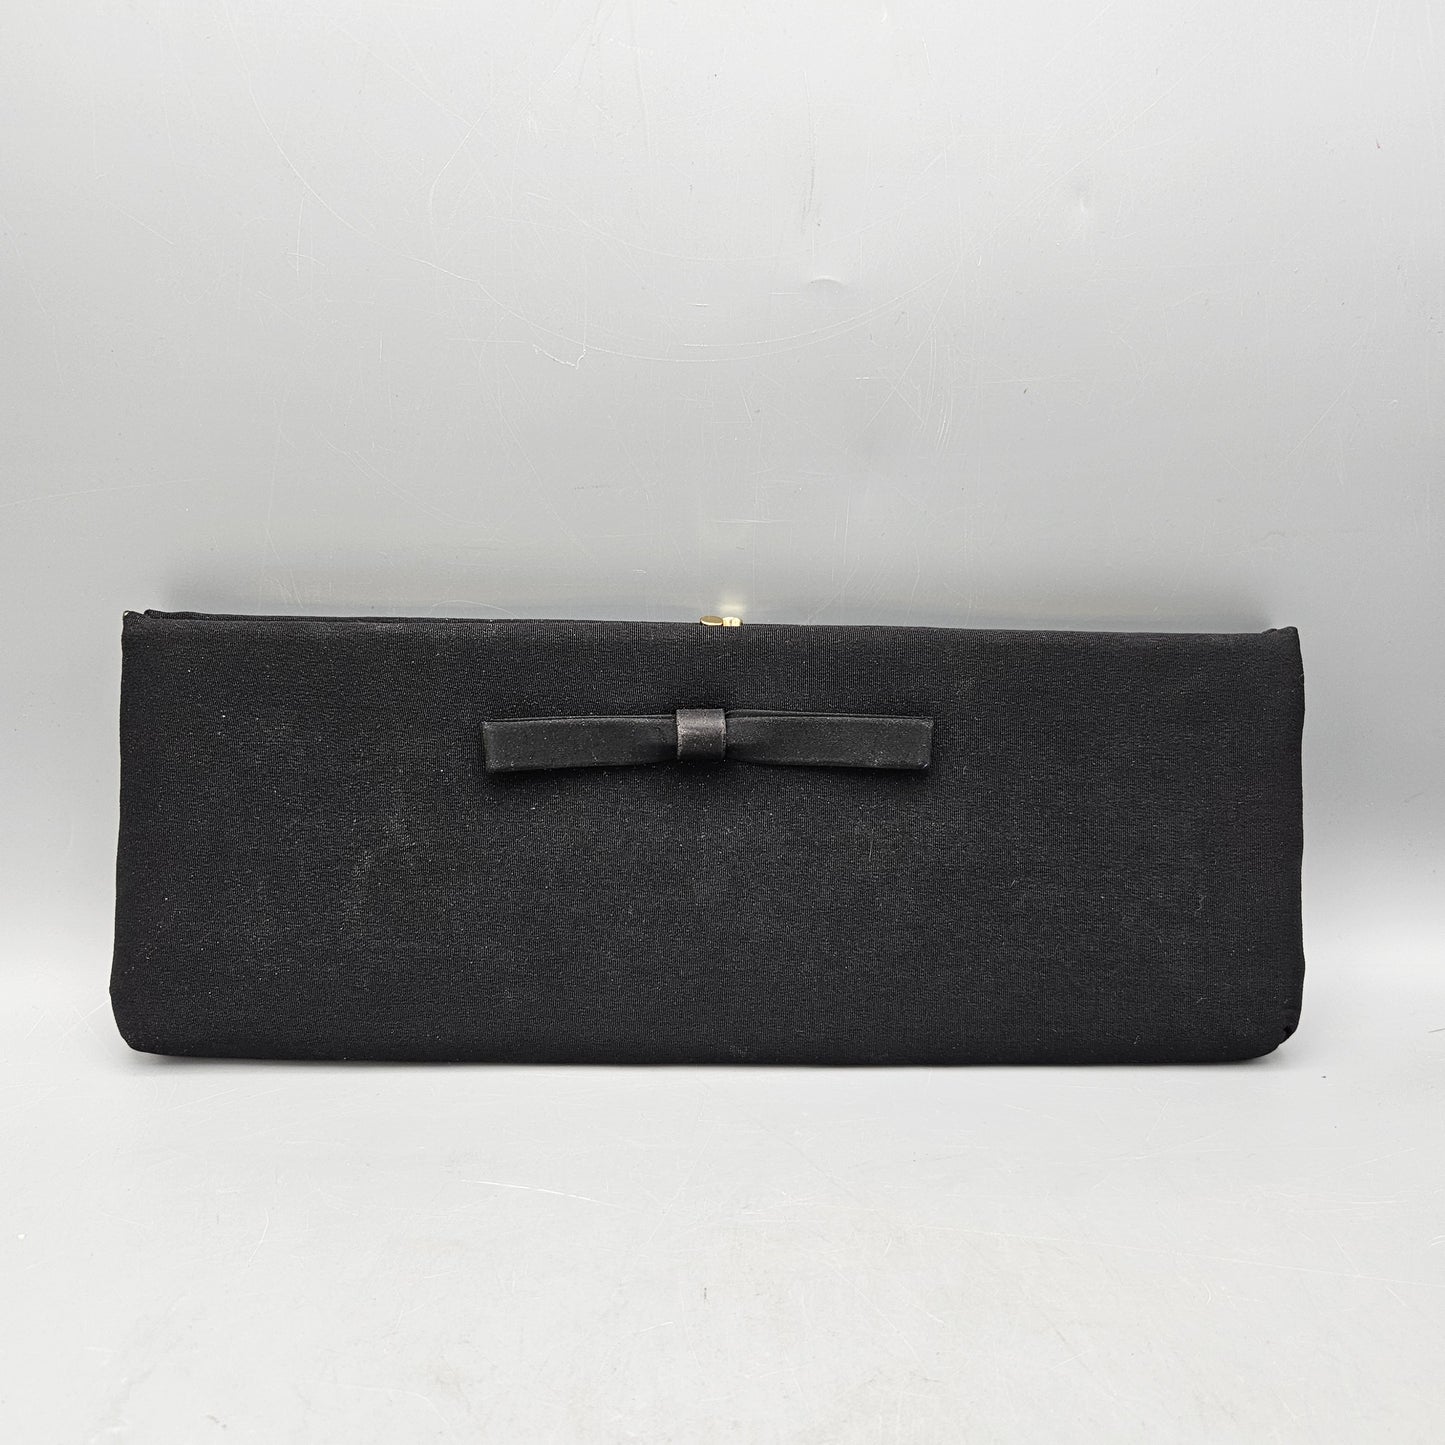 1950's Vintage Black Clutch Purse with Bow by HL